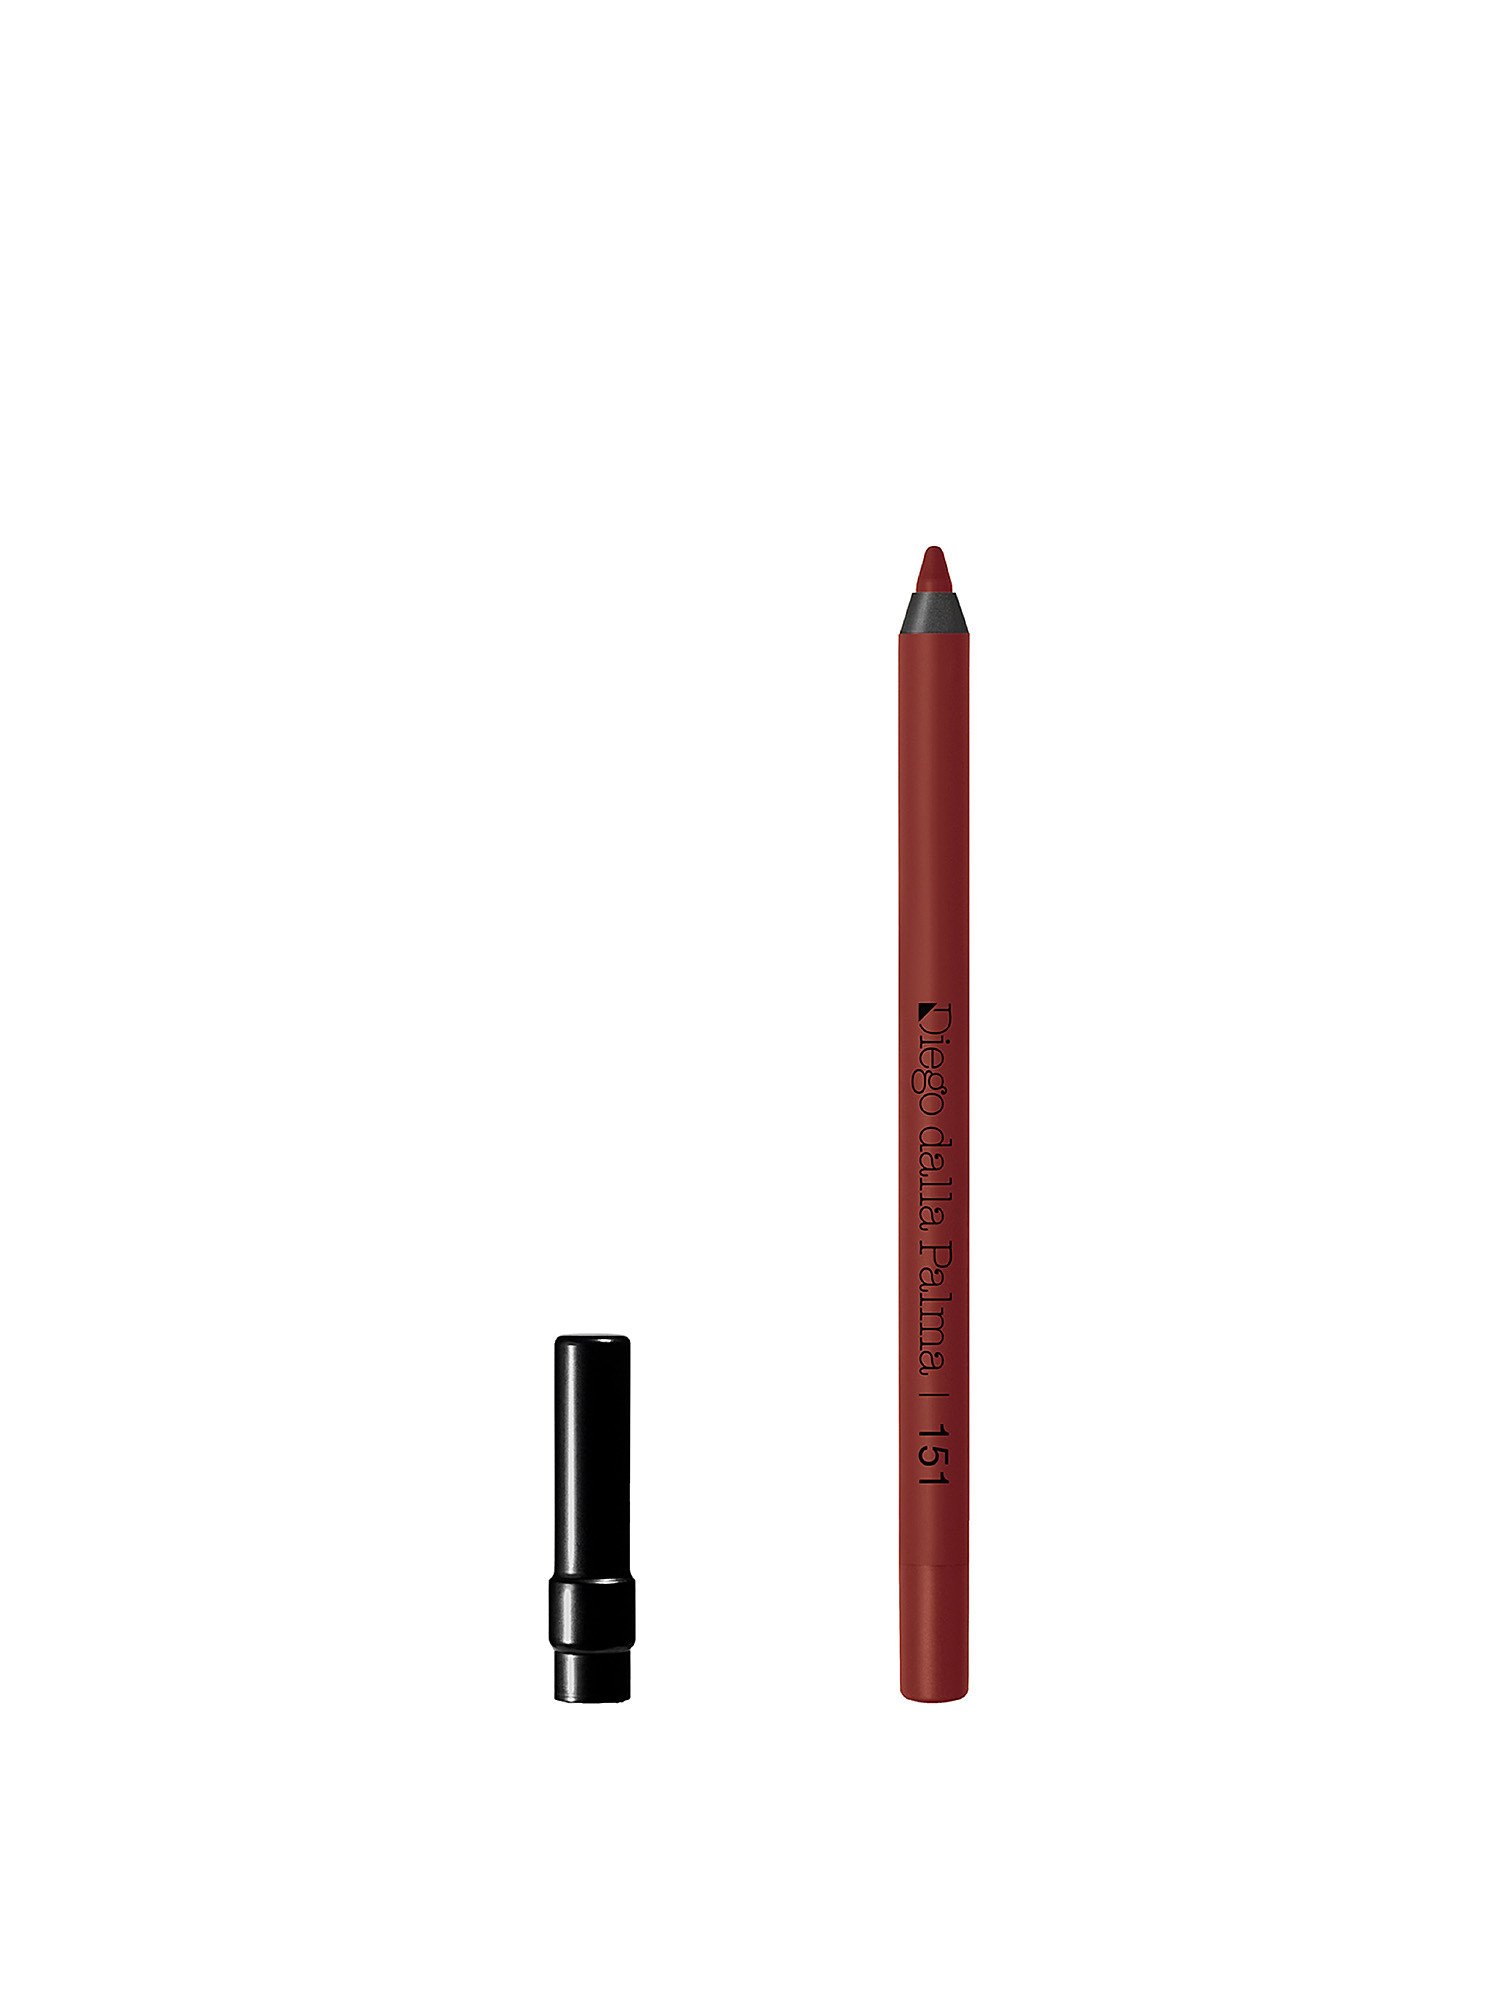 Makeupstudio STAY ON ME Lip Liner Long Lasting Water resistant - 151 castagna, Marrone scuro, large image number 0